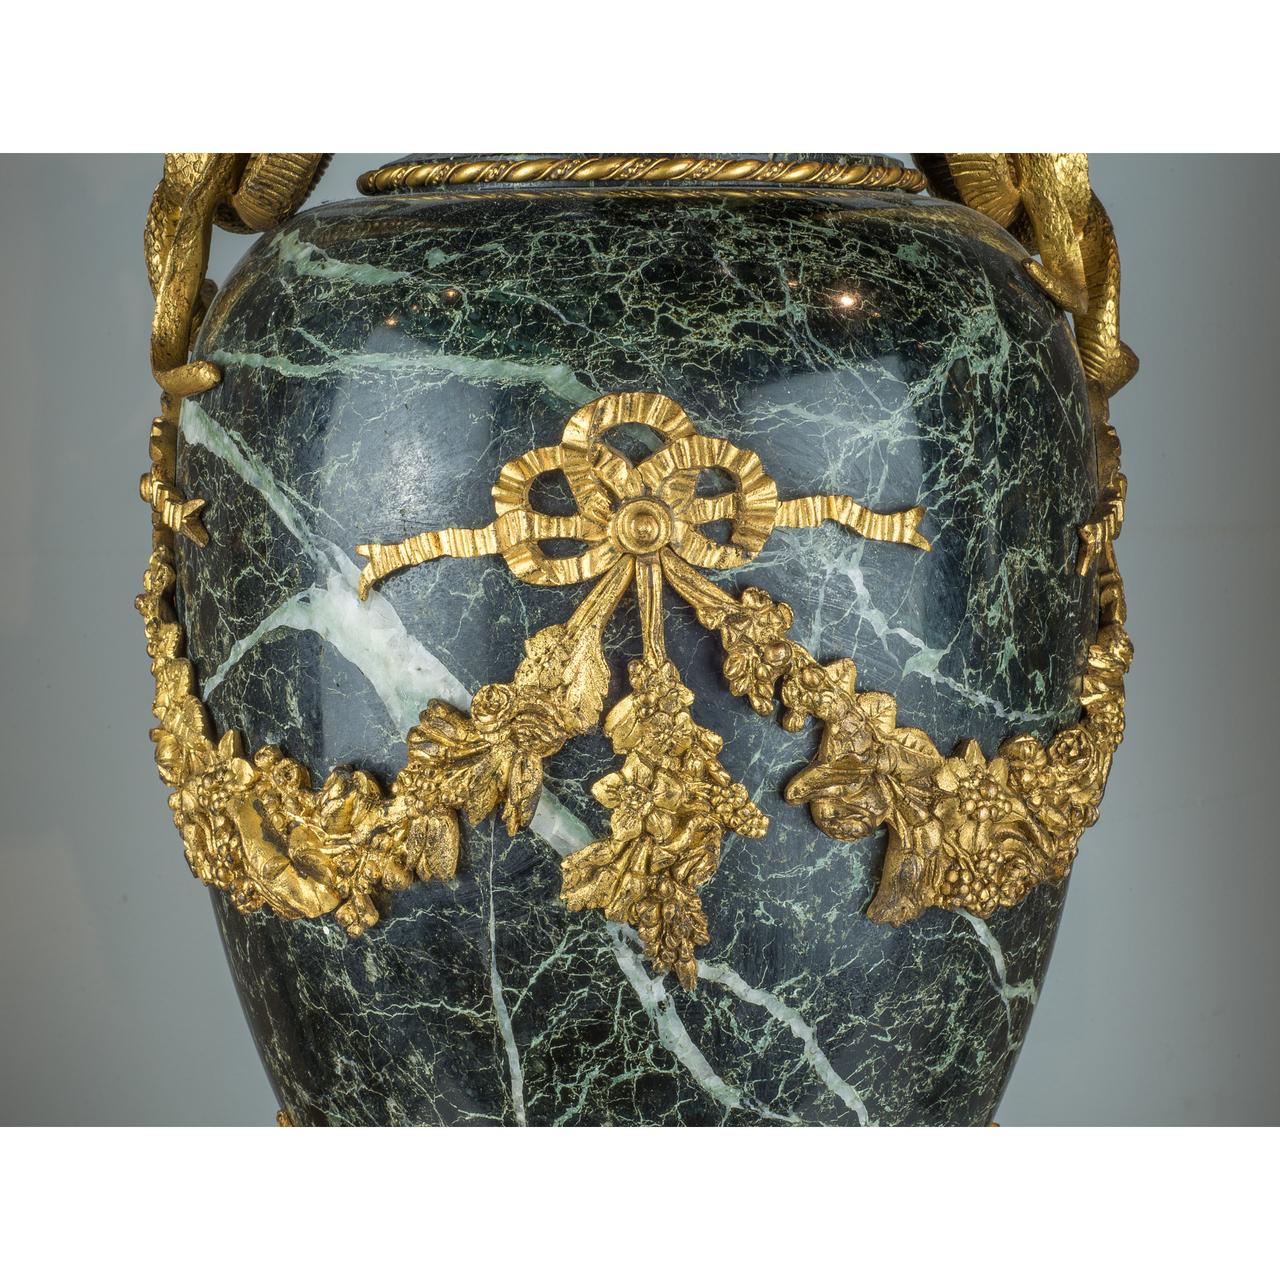 Gilt A Grand Ormolu-Mounted Verde Antico Marble Urns with Serpent Handles For Sale